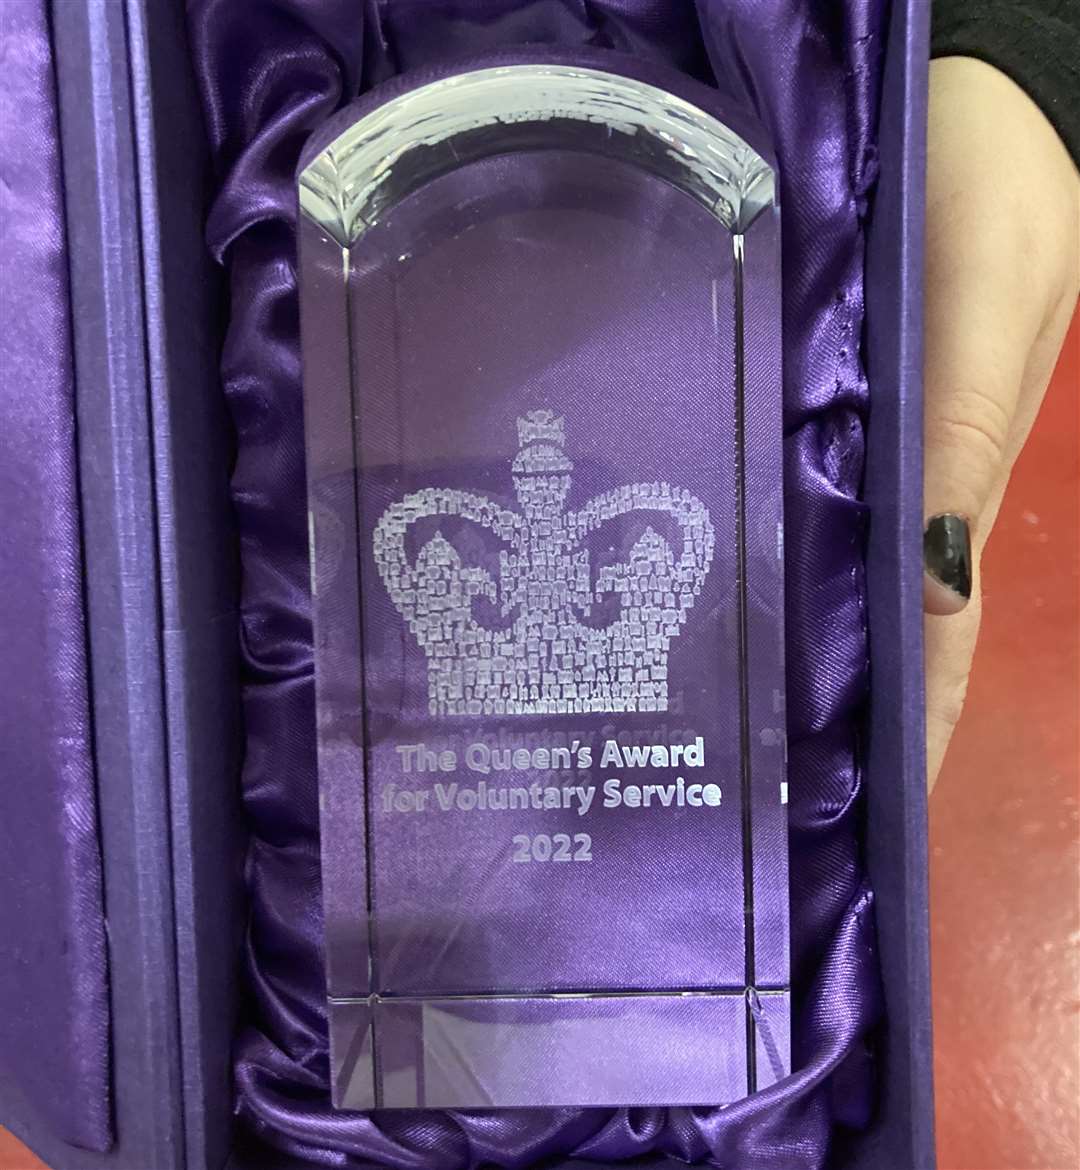 The Queen's Award for Voluntary Service presented to Sheppey Sea Cadets